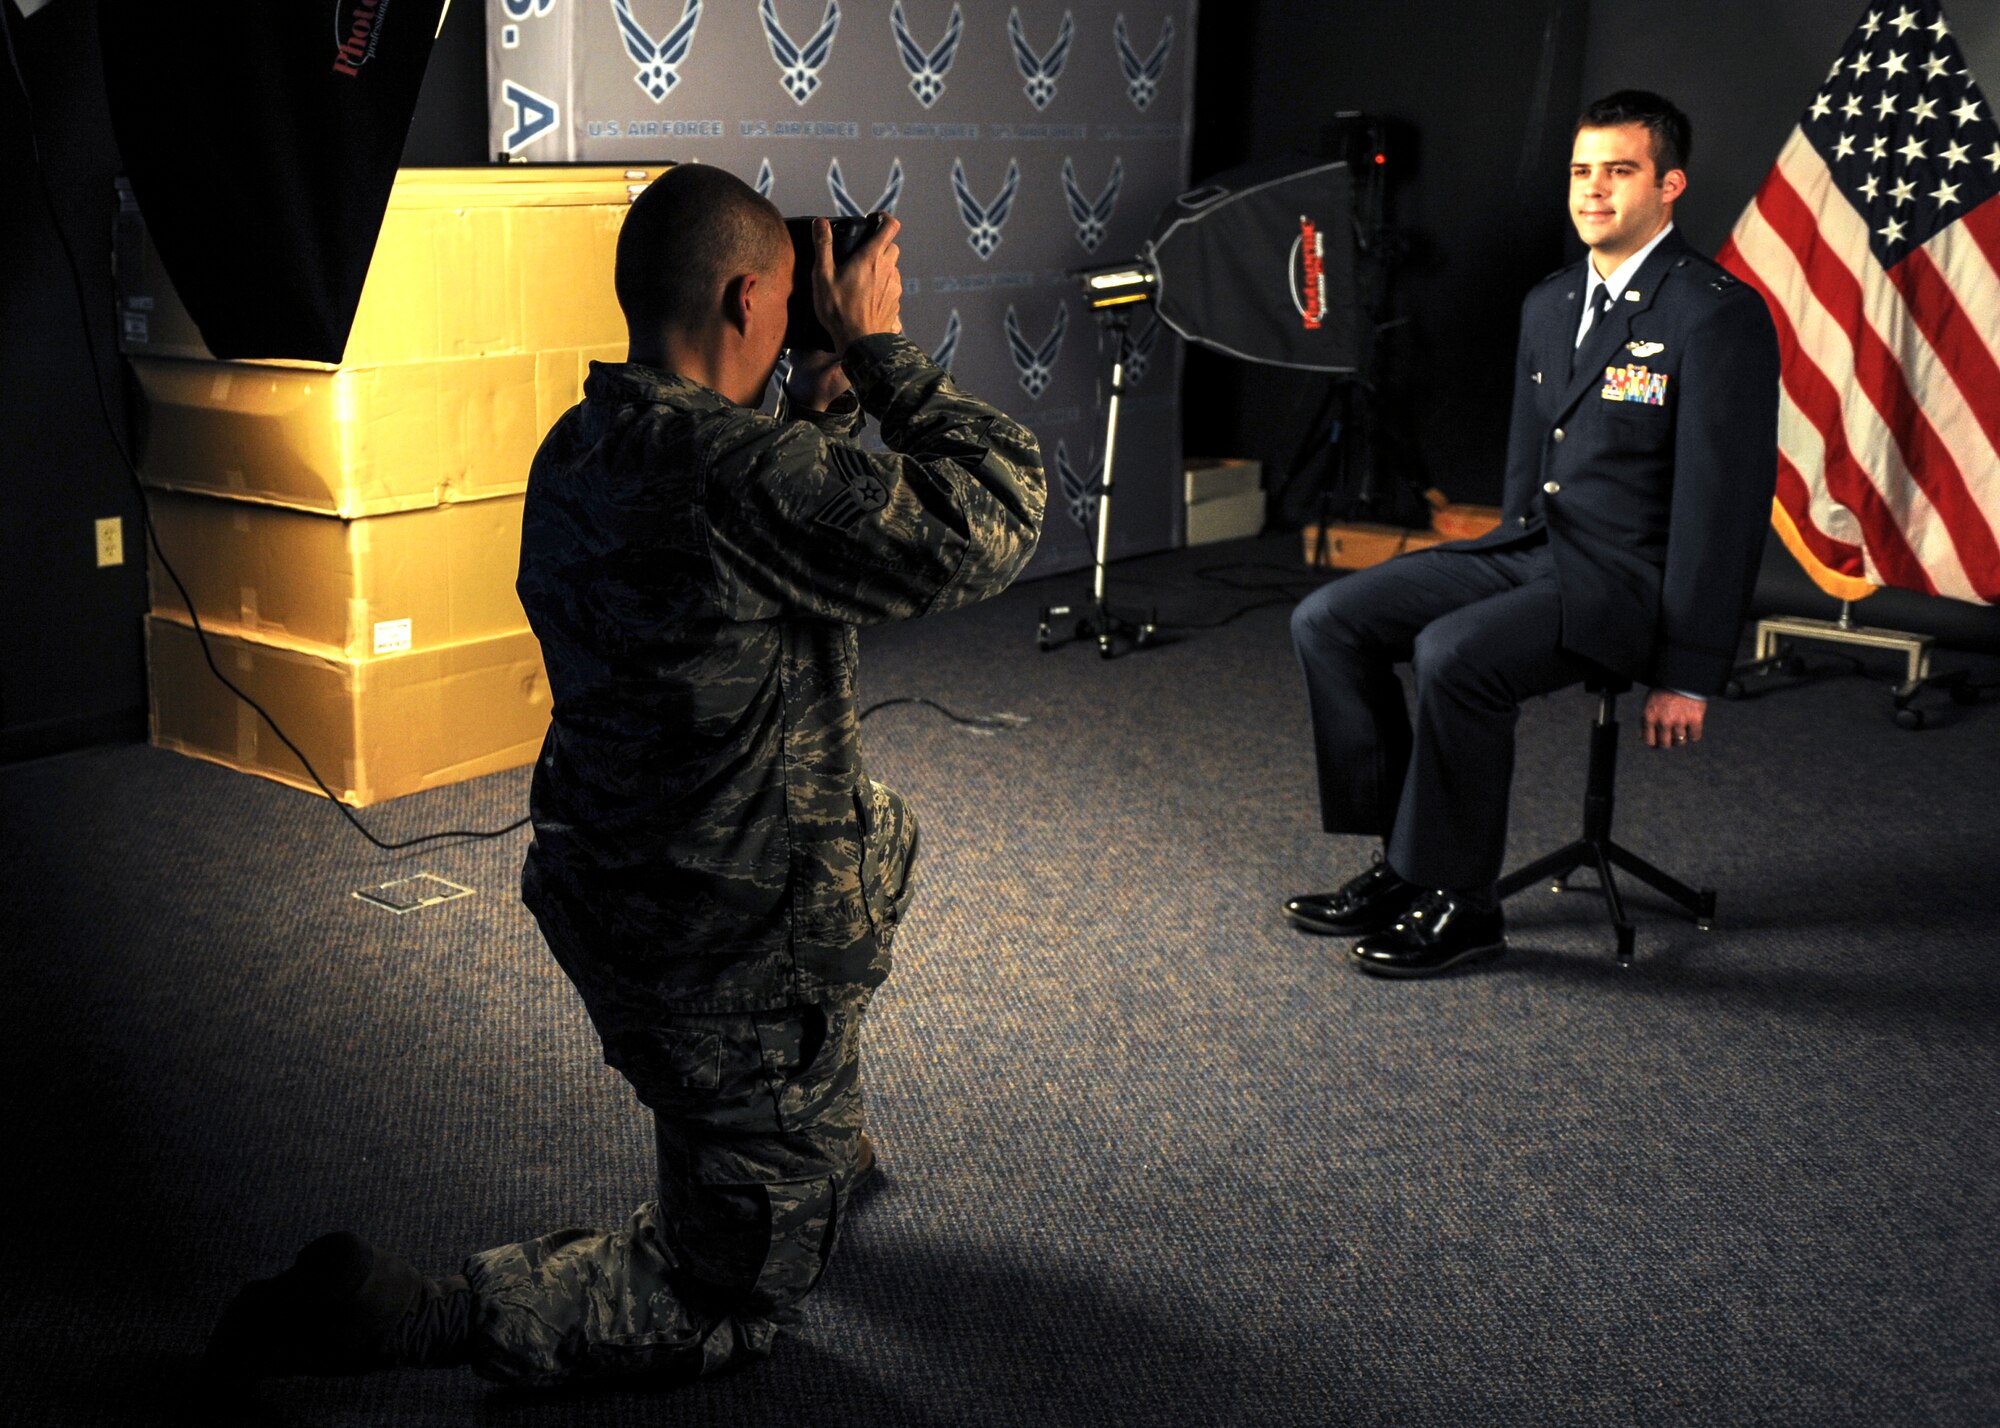 Senior Airman Rusty Frank, 19th Airlift Wing public affairs photojournalist, captures a studio portrait of Capt. Matthew Andrews, a 29th Weapons Squadron weapons instructor course cadre, Feb. 26, 2013, at Little Rock Air Force Base, Ark. The PA team supports studio photo sessions for official requests, such as award and special duty packages. (U.S. Air Force photo by Senior Airman Regina Agoha)